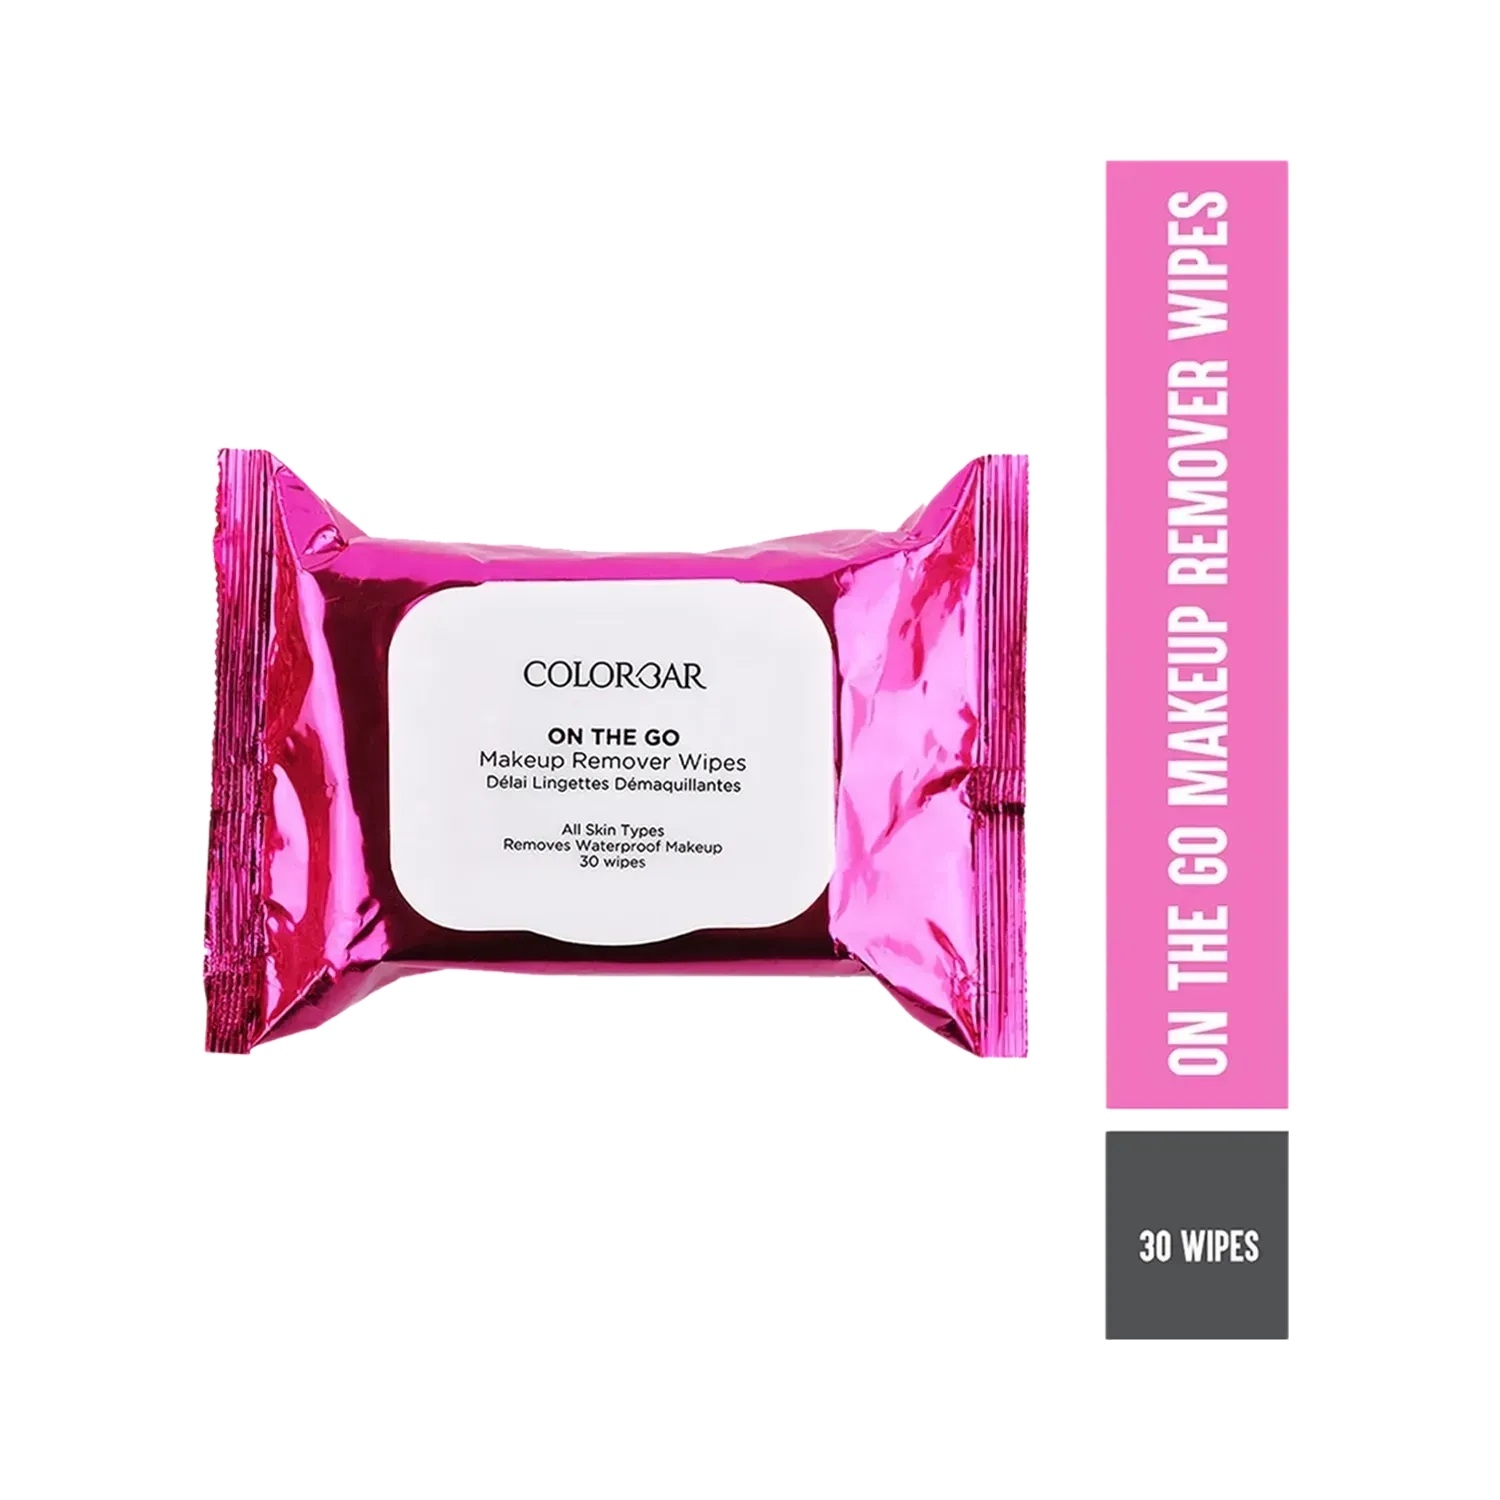 Colorbar | Colorbar On The Go Make-up Remover Wipes (30 Pcs)